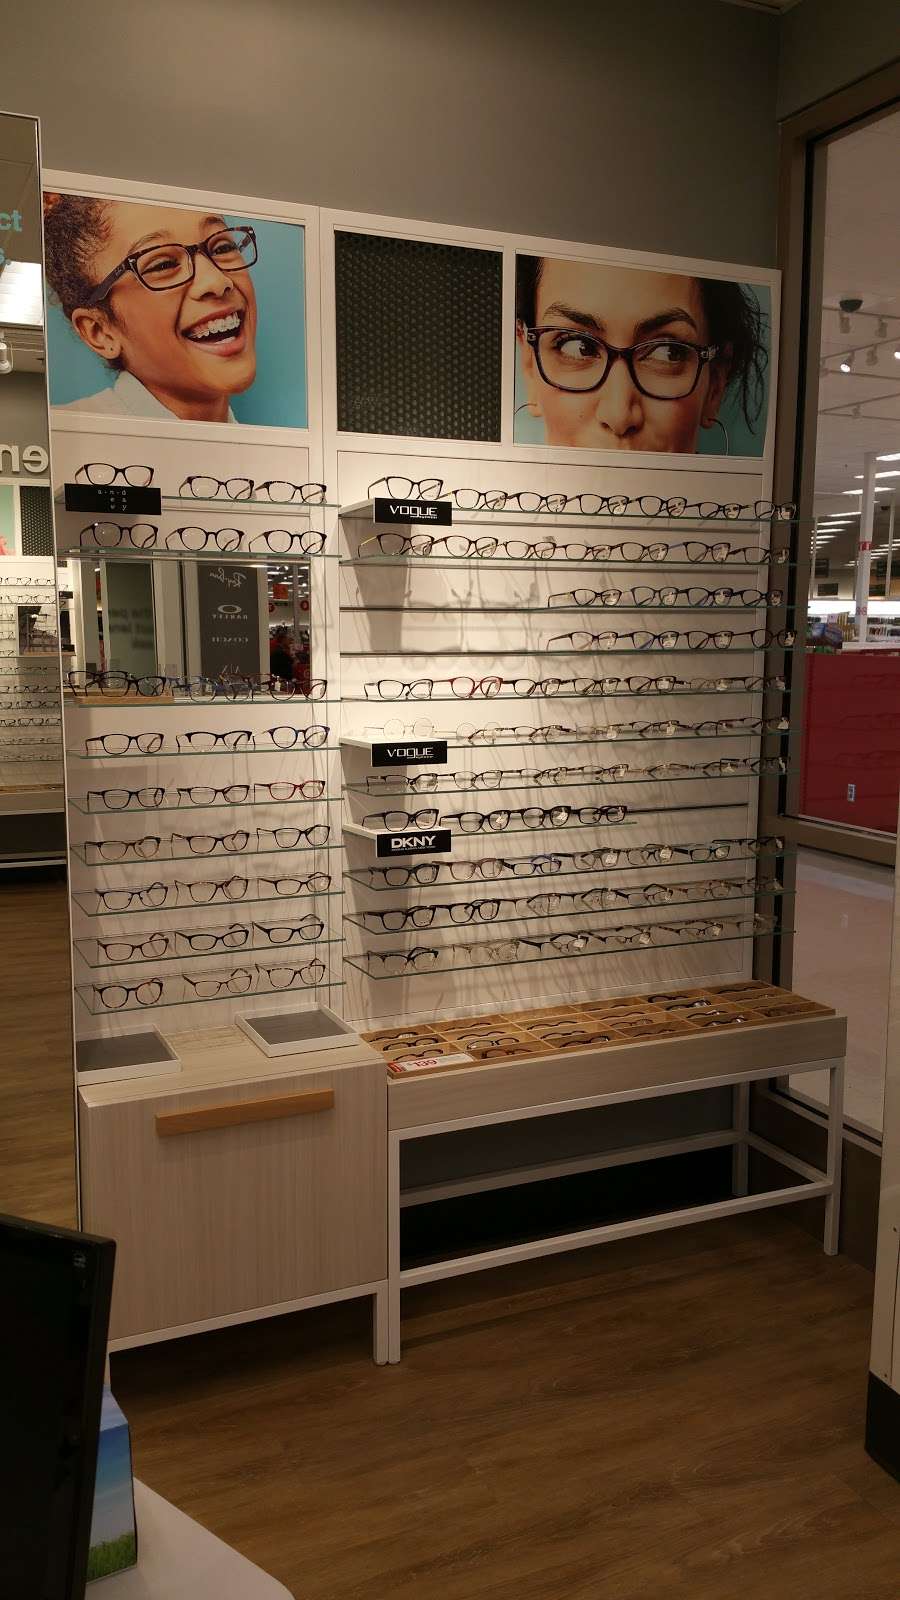 Target Optical | 6150 Bayfield Pkwy, Concord, NC 28027 | Phone: (704) 795-4225